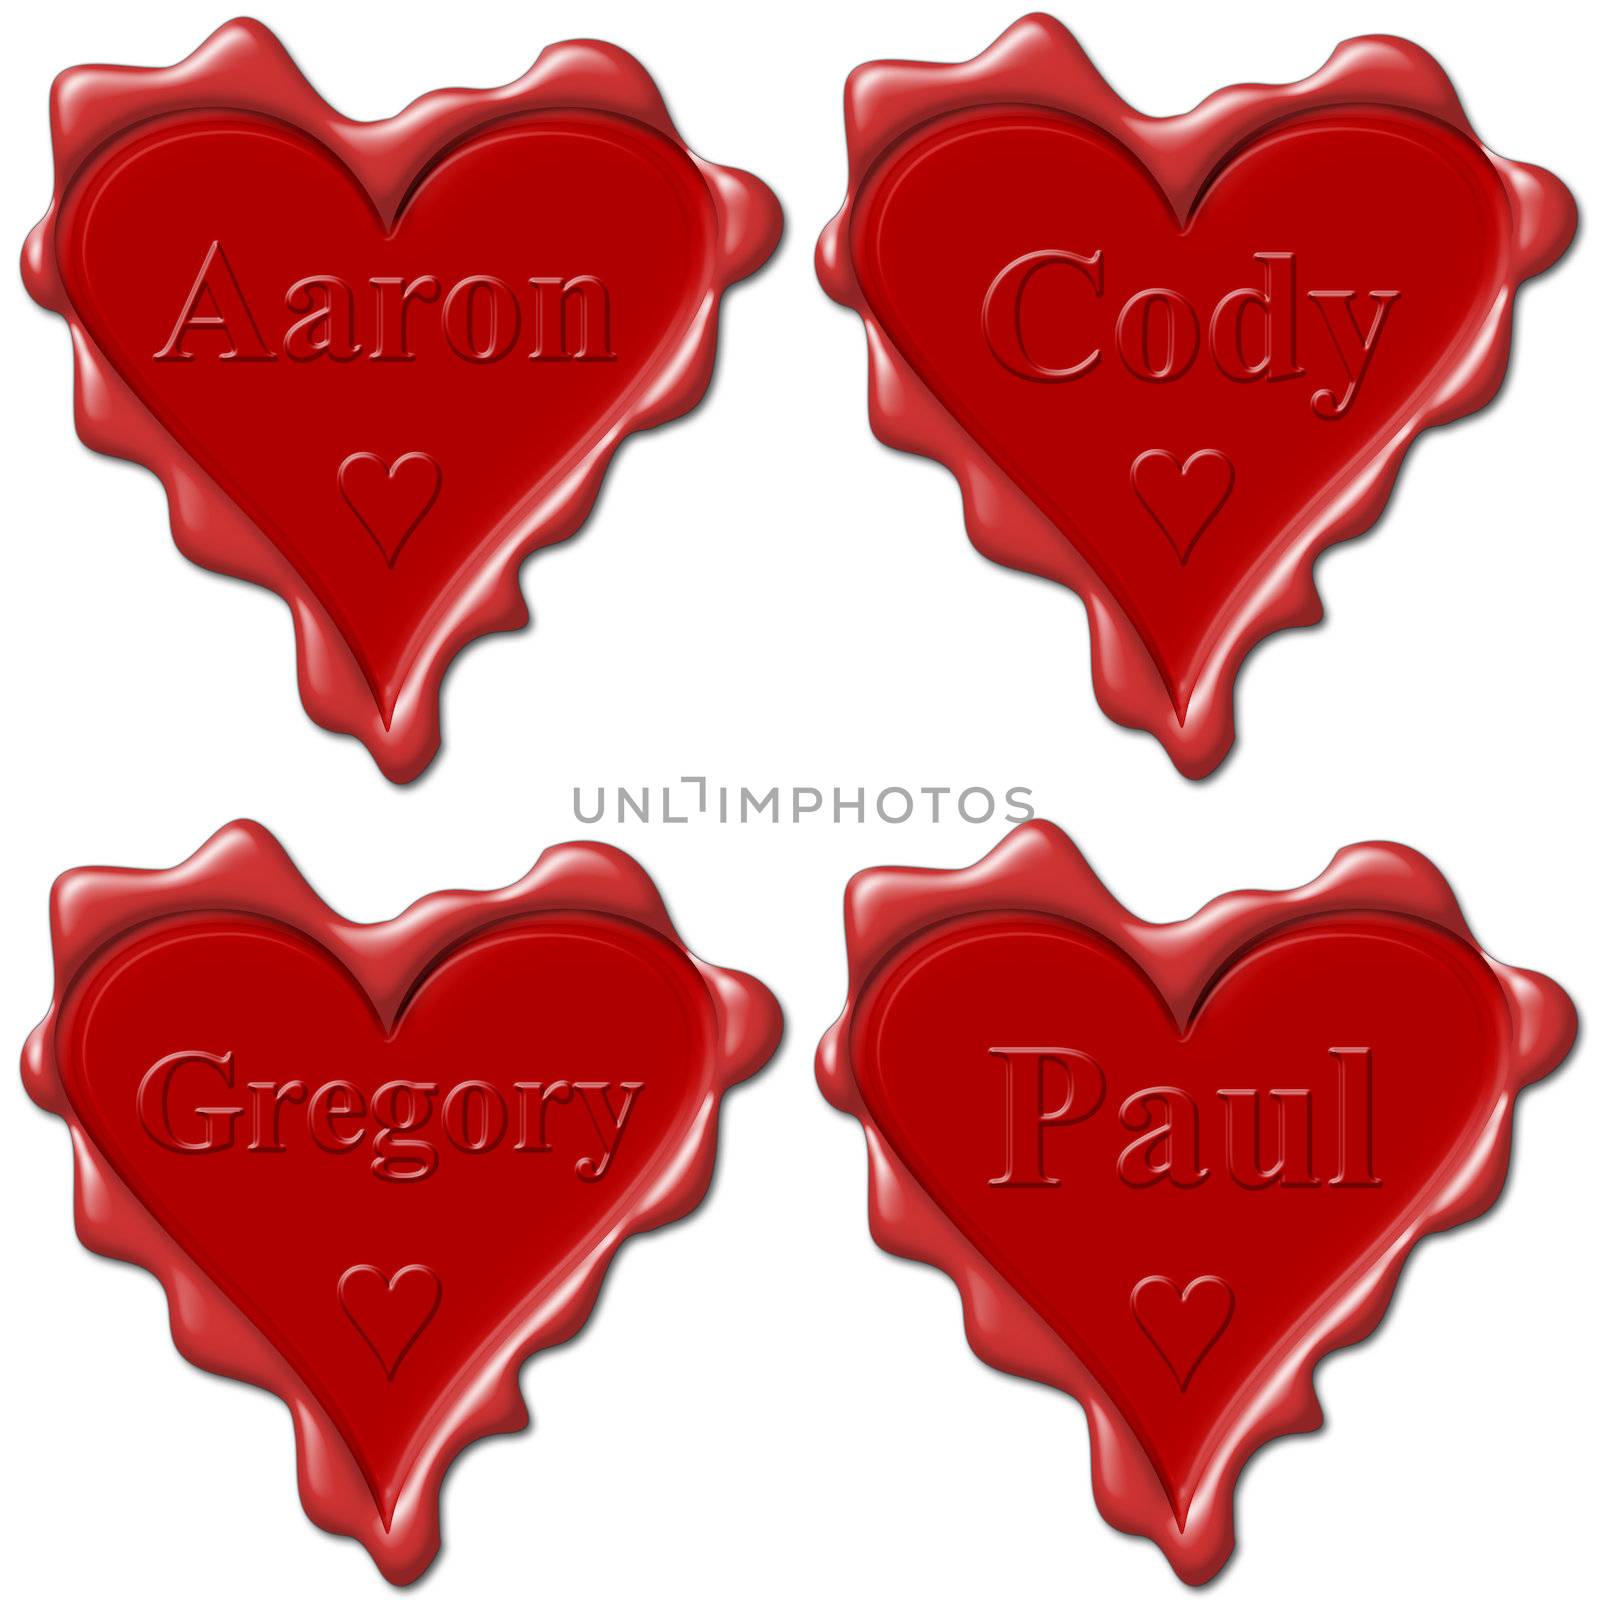 Valentine love hearts with names: Aaron, Cody, Gregory, Paul by mozzyb